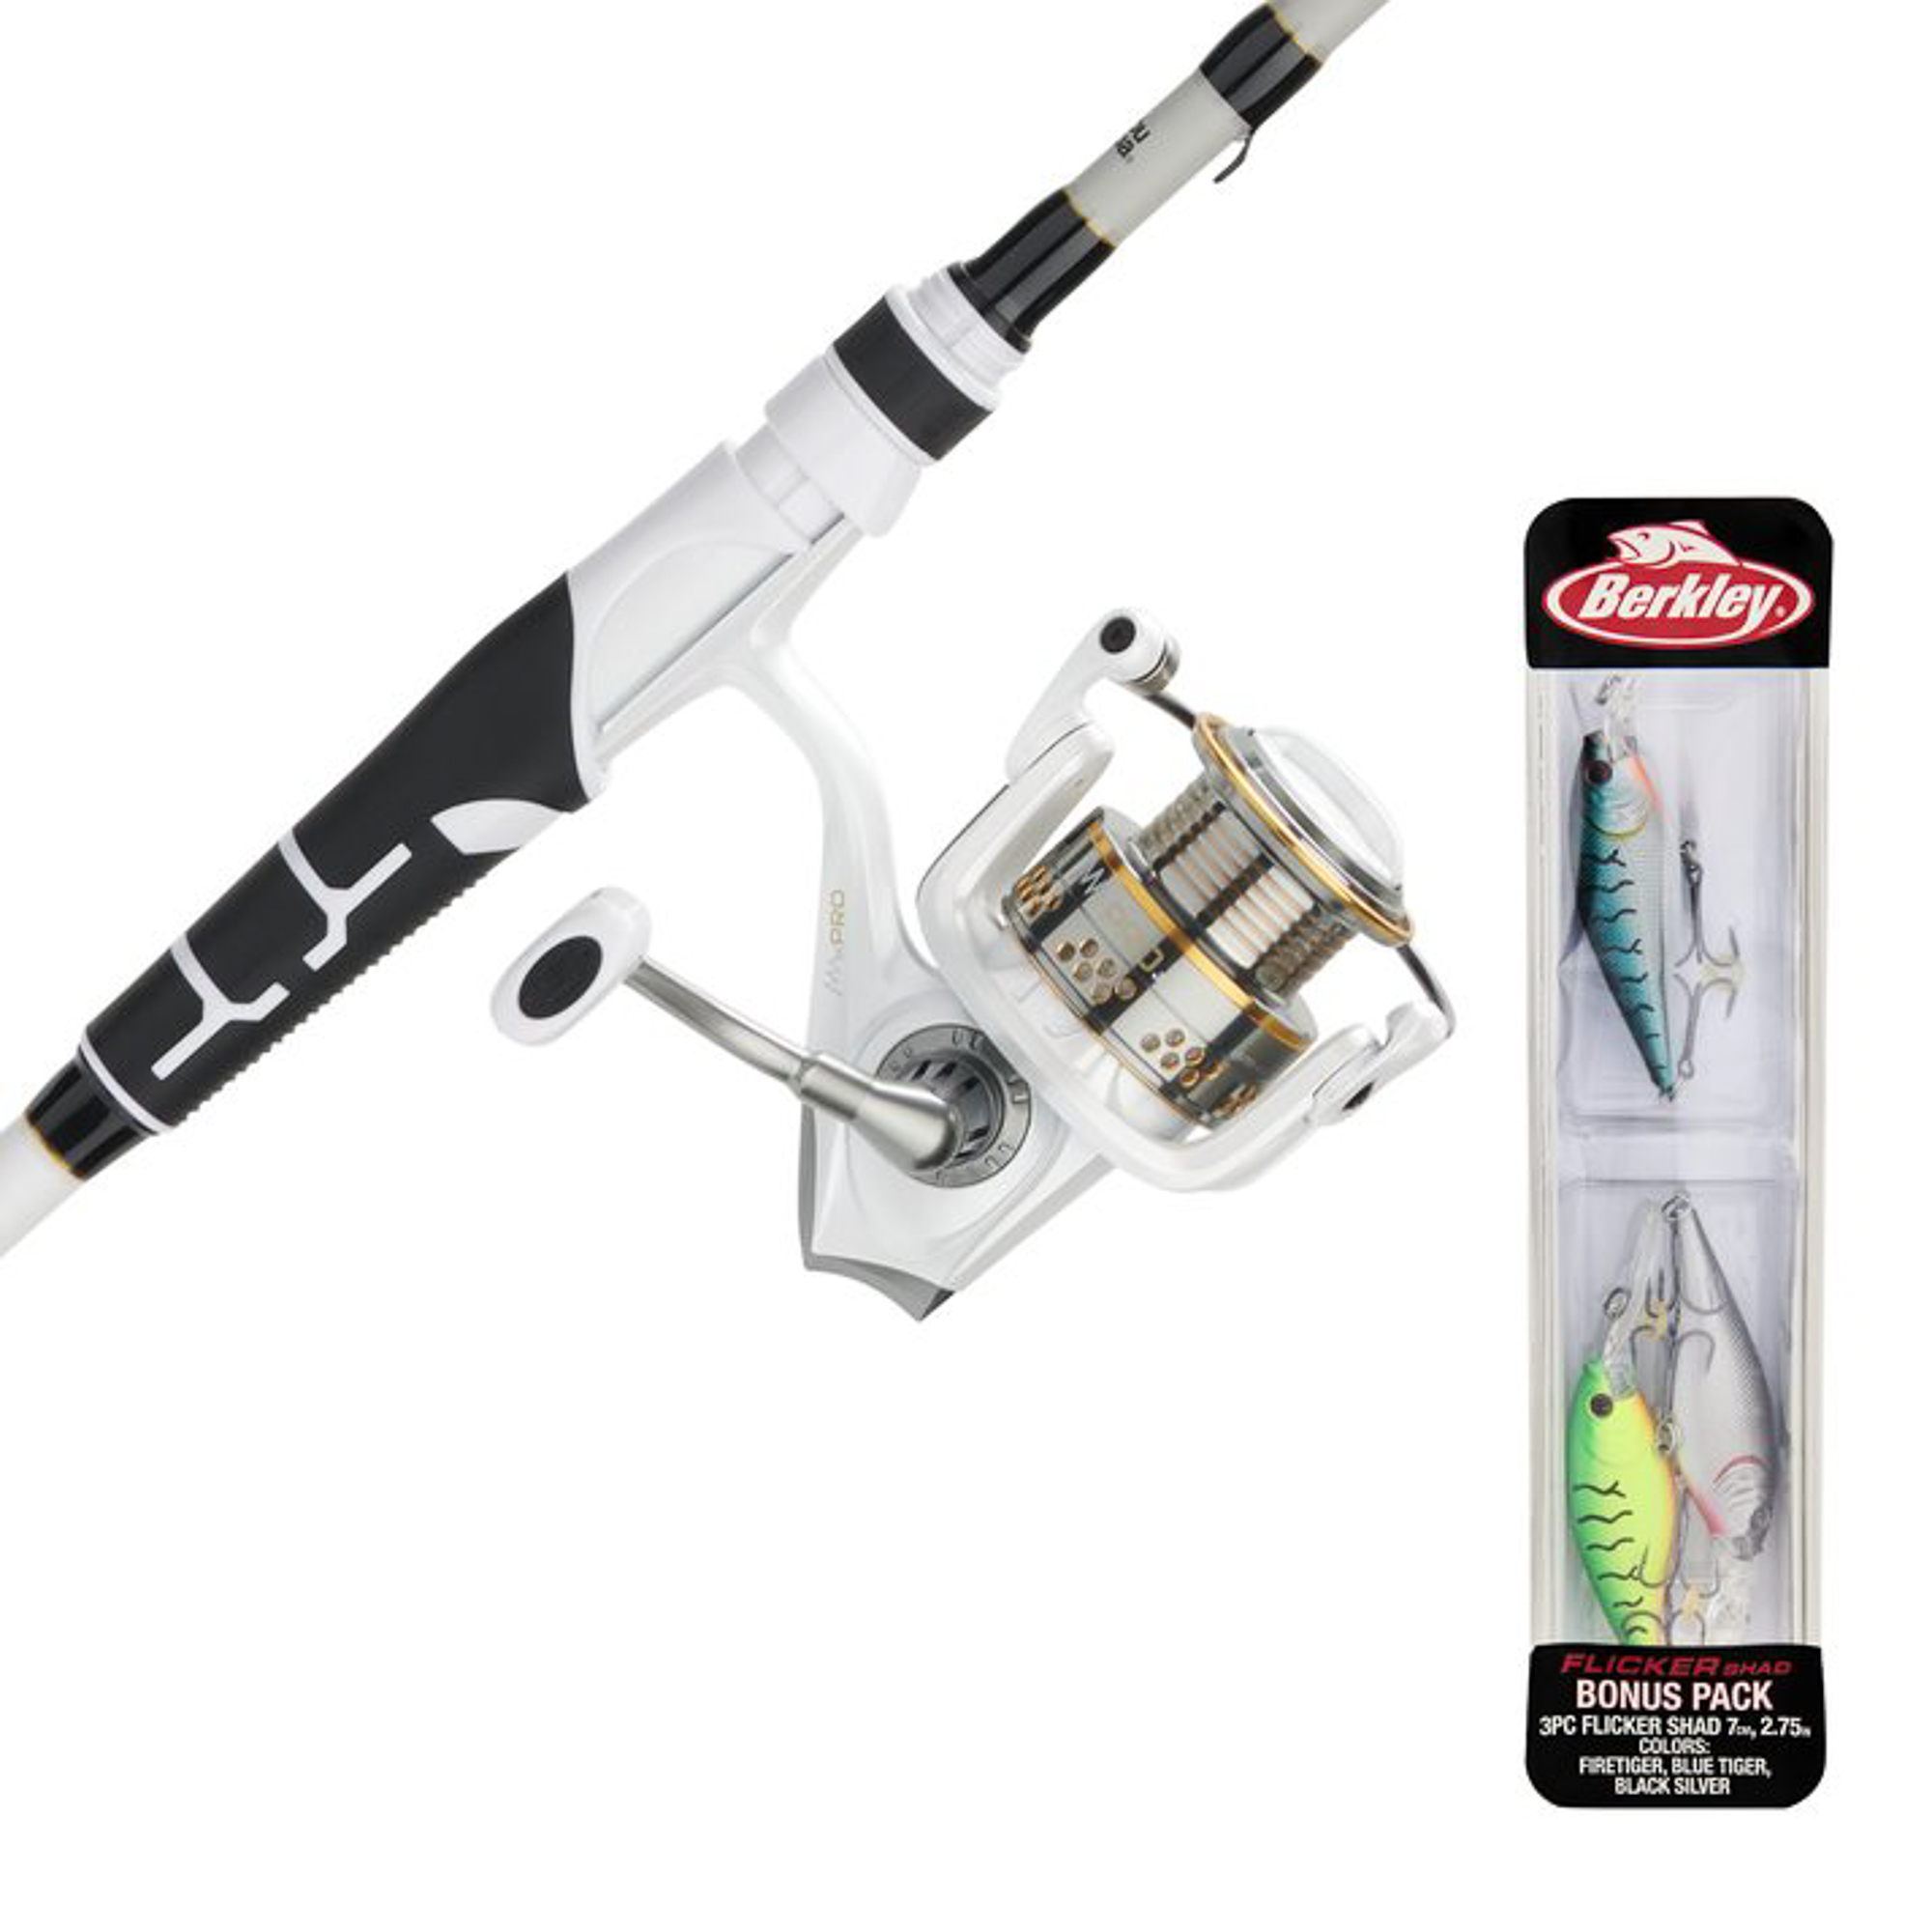 Abu Garcia Max Pro Spinning Rod and Reel Combo with Berkley Flicker Shad Bait Kit - image 1 of 6